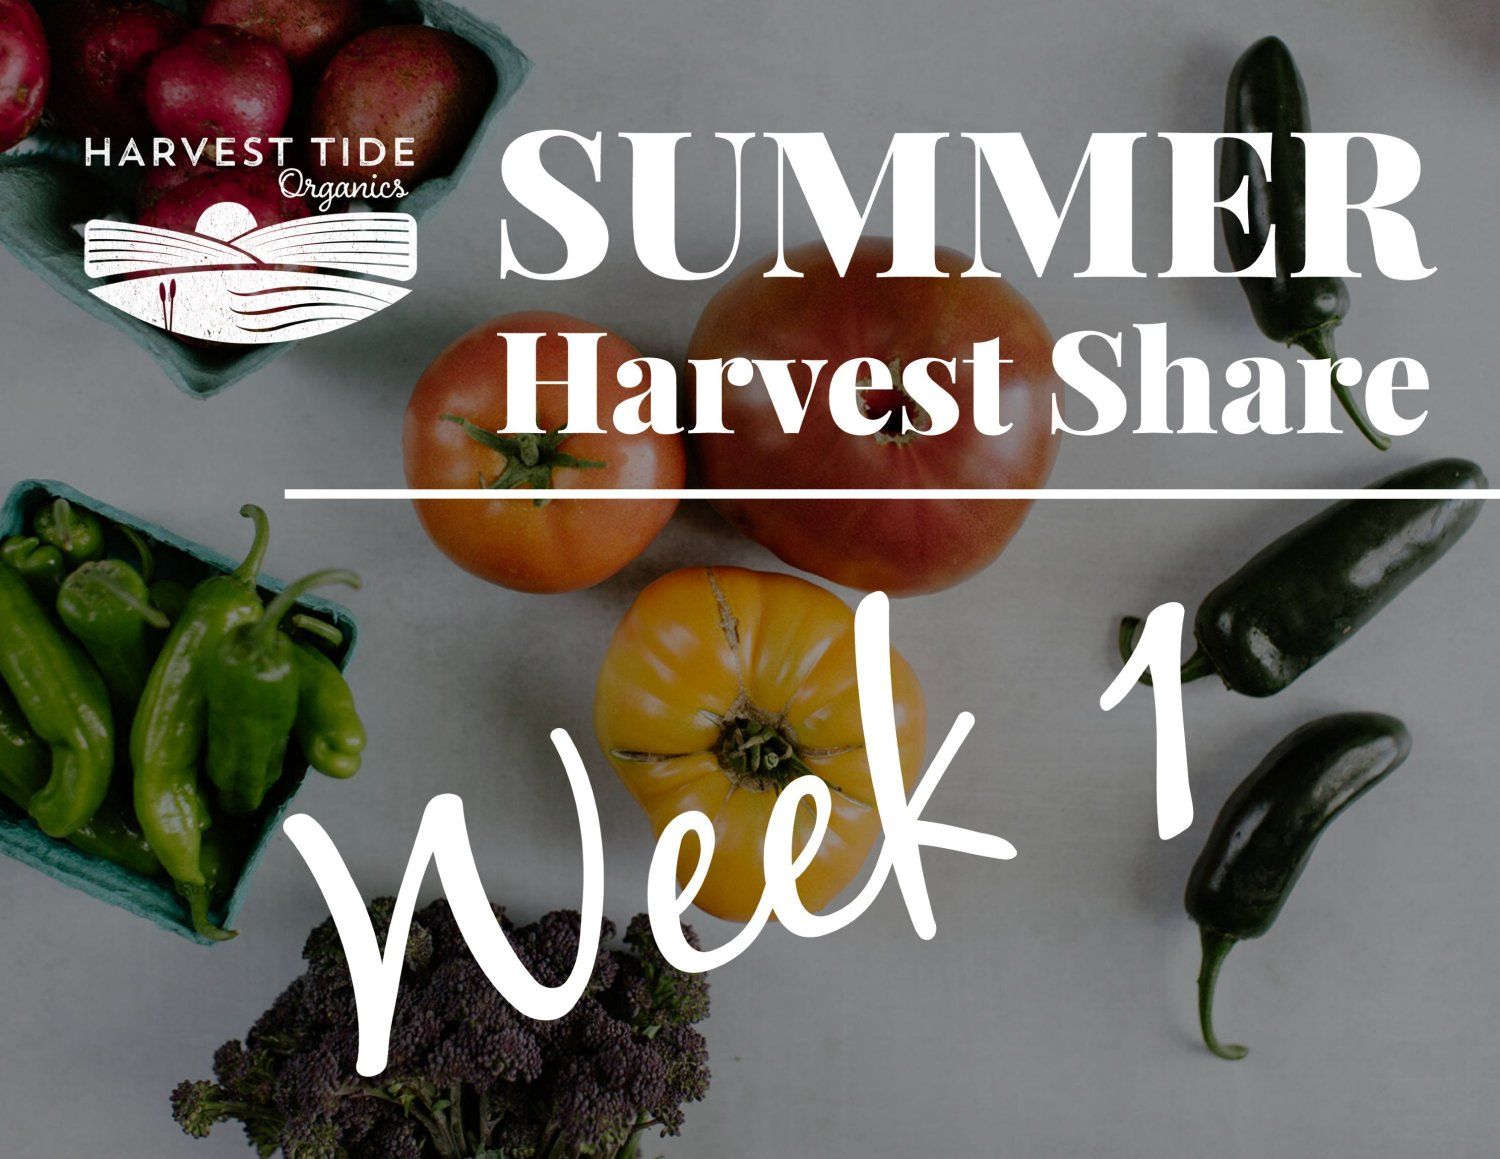 It's the first week of our 2022 Summer Share!